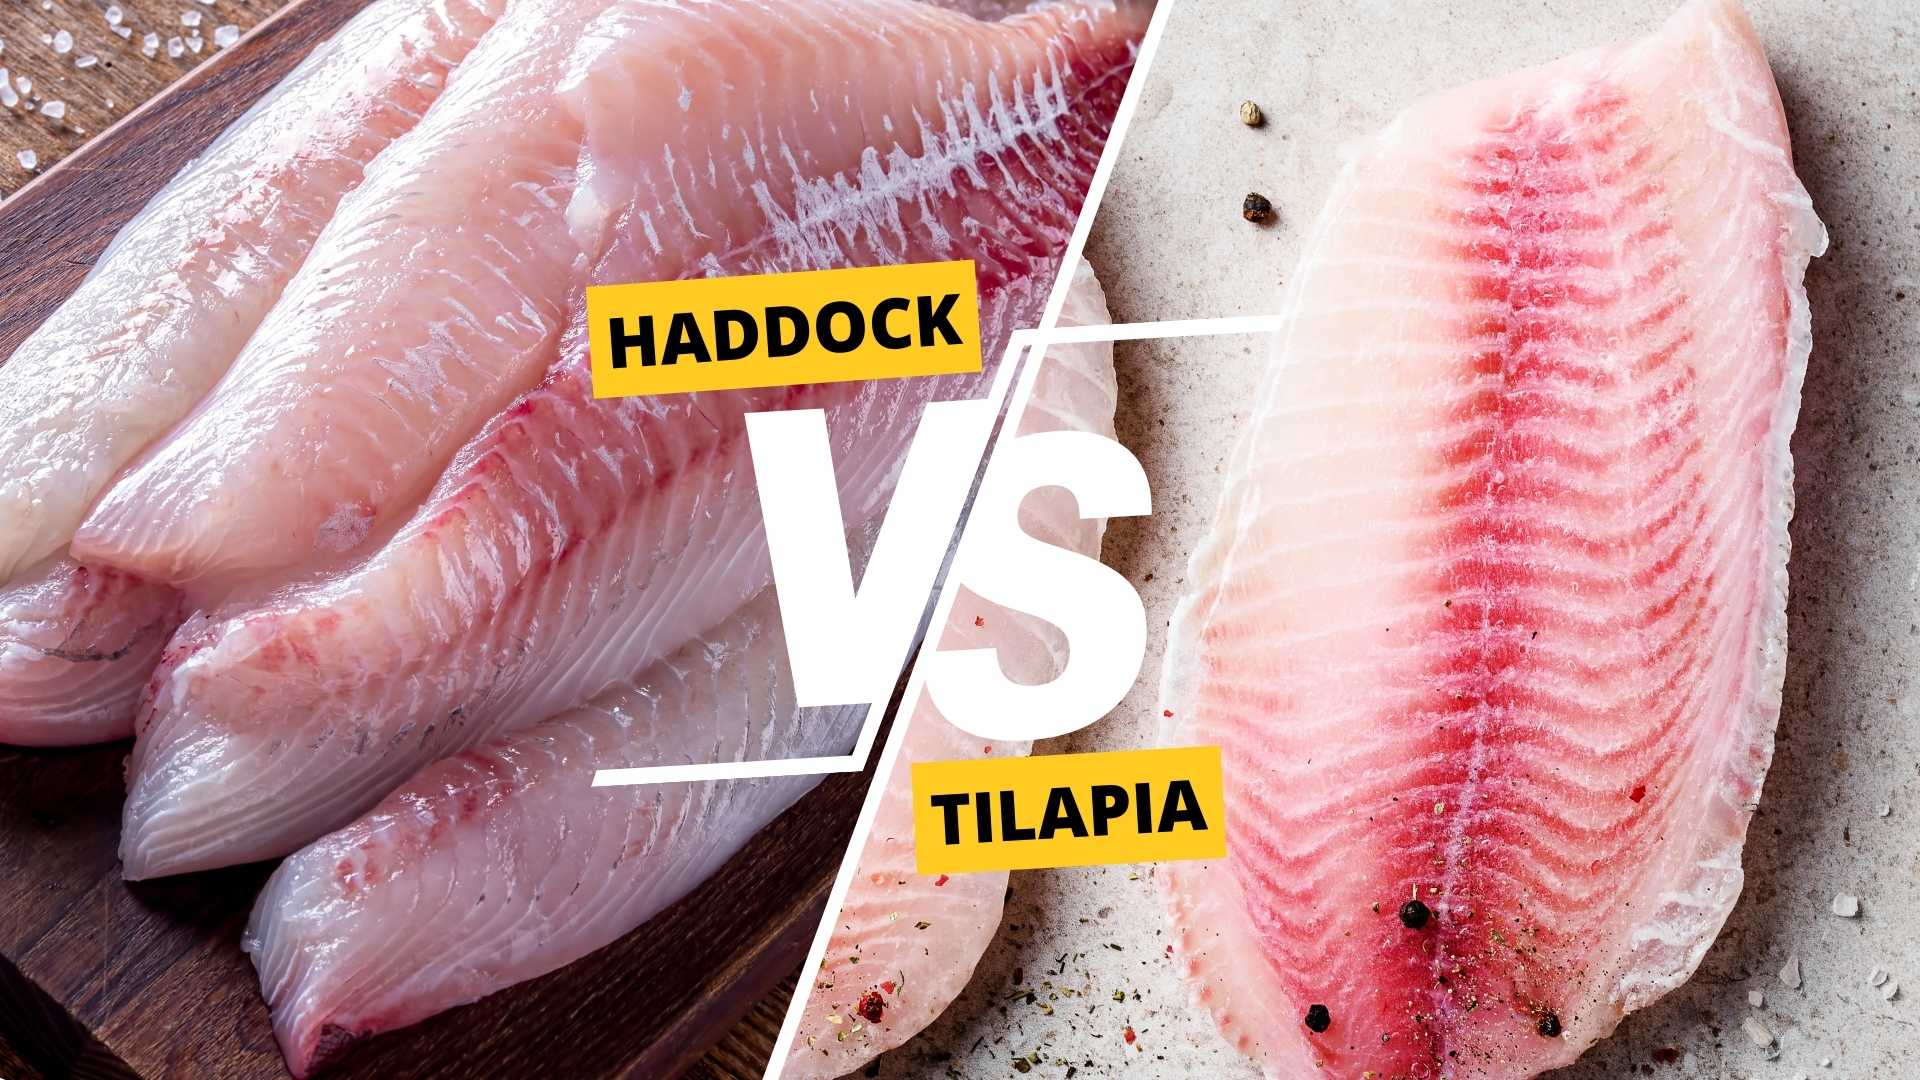 Haddock and Tilapia Compared – Which is the Better Fish?